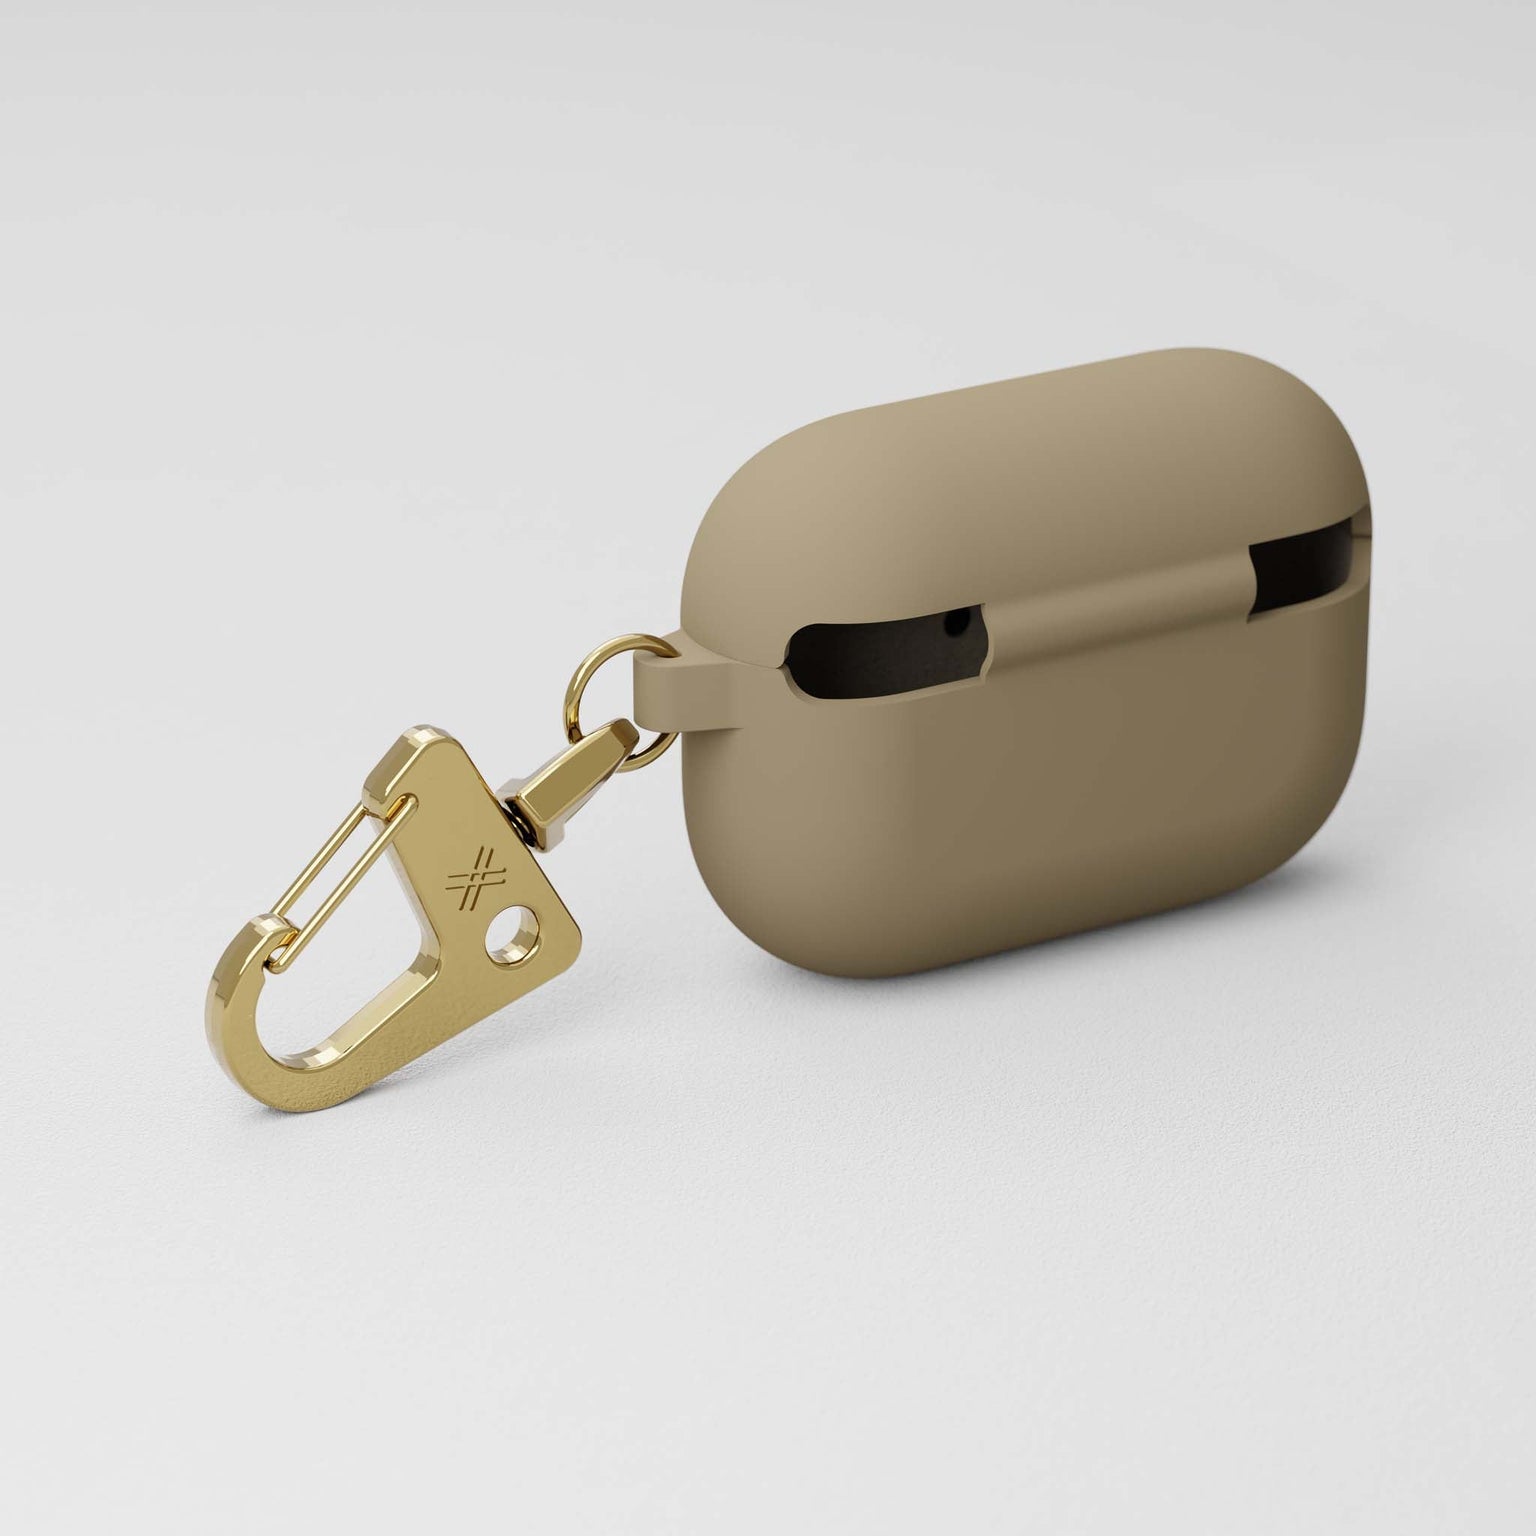 AirPods Pro case in Taupe (Beige) soft-touch and golden metal carabiner | XOUXOU